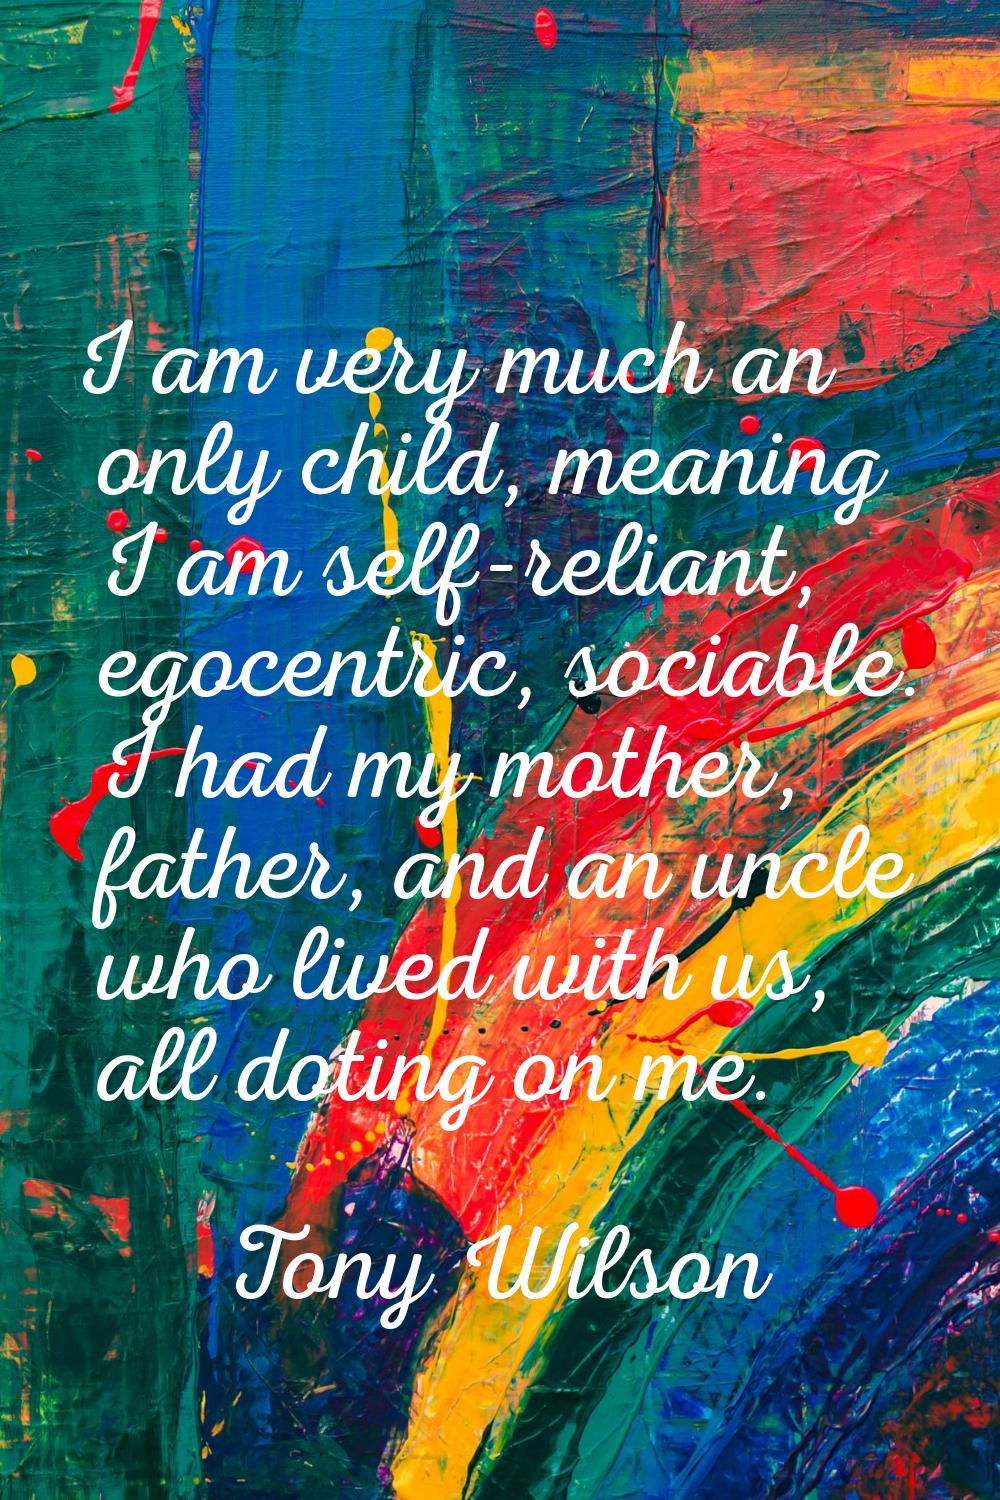 I am very much an only child, meaning I am self-reliant, egocentric, sociable. I had my mother, fat